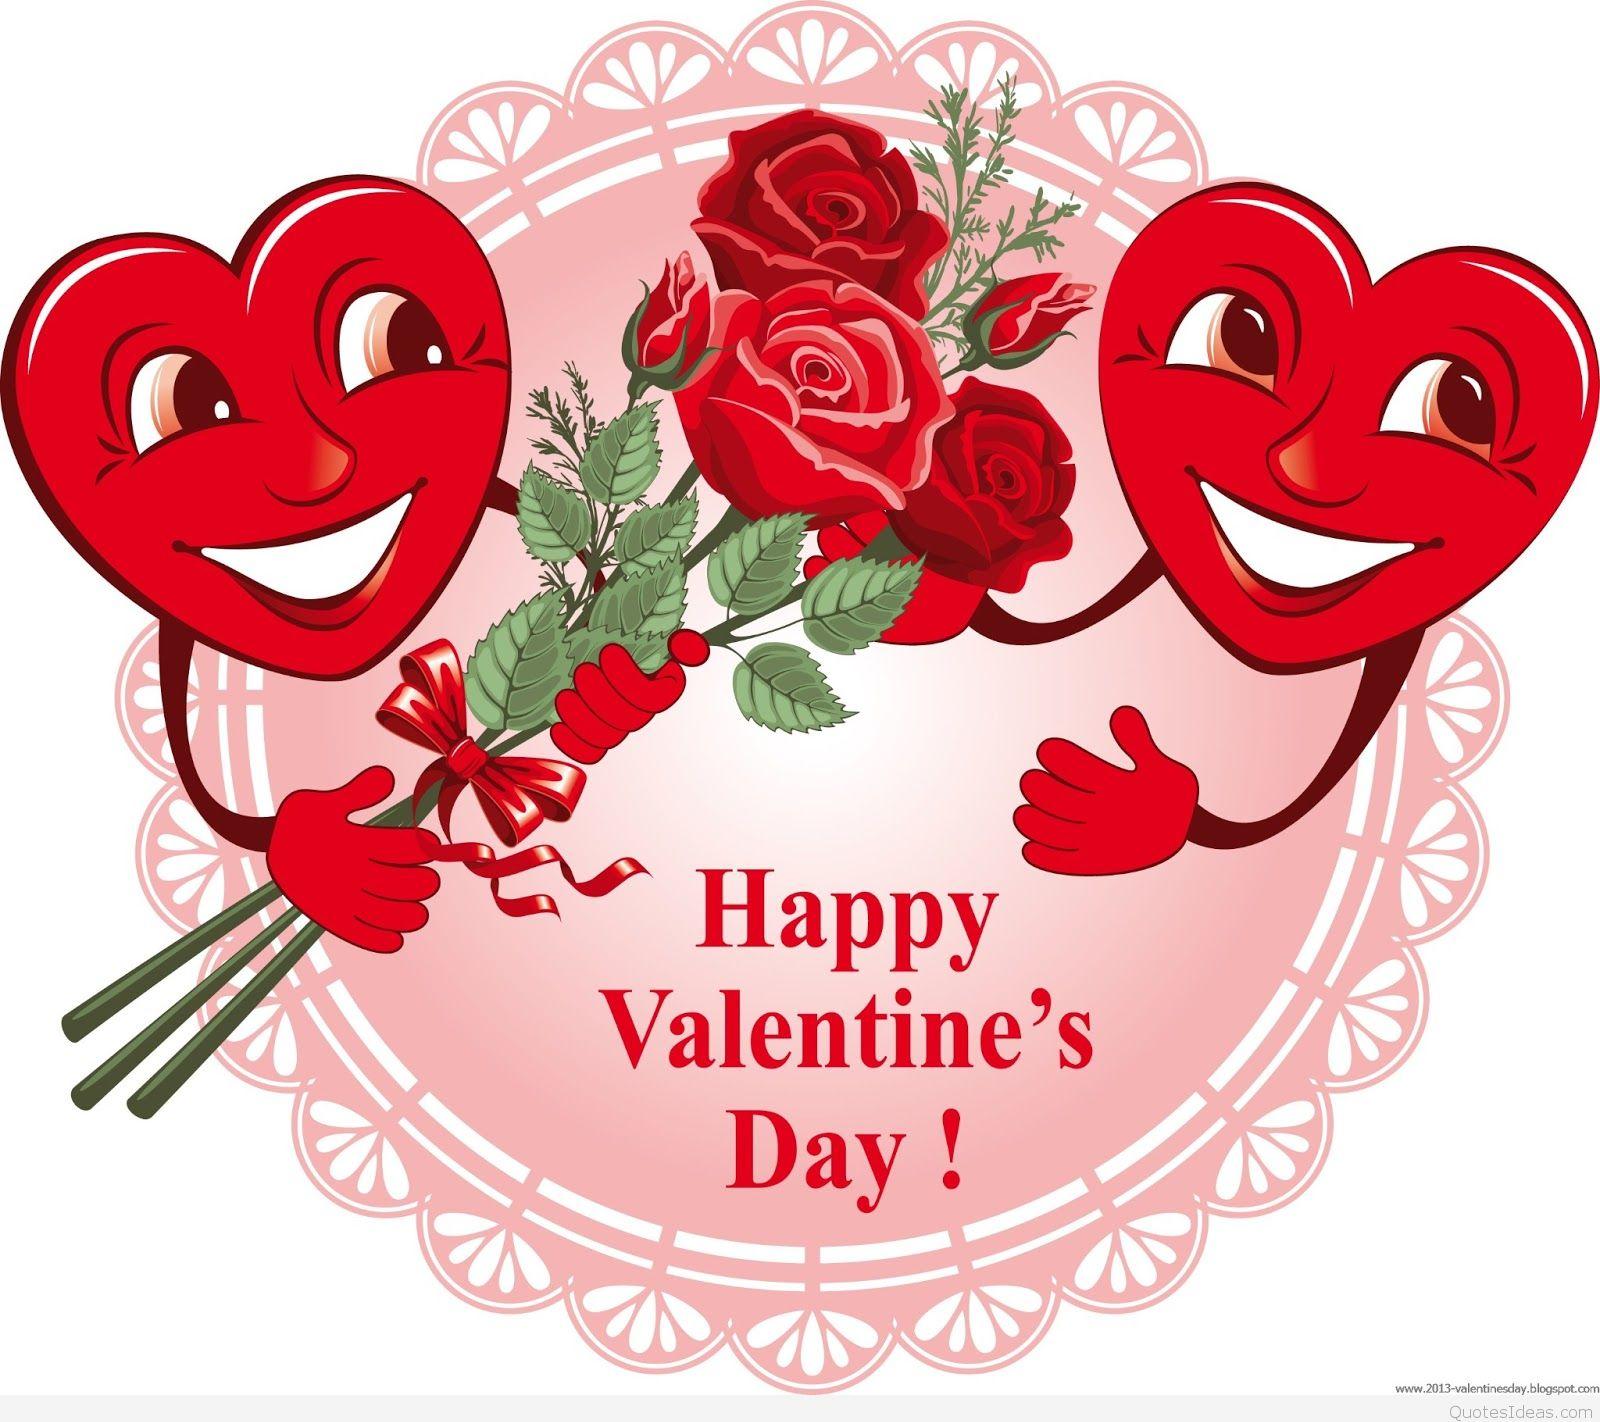 Valentine's Day Cartoons Wallpapers - Wallpaper Cave